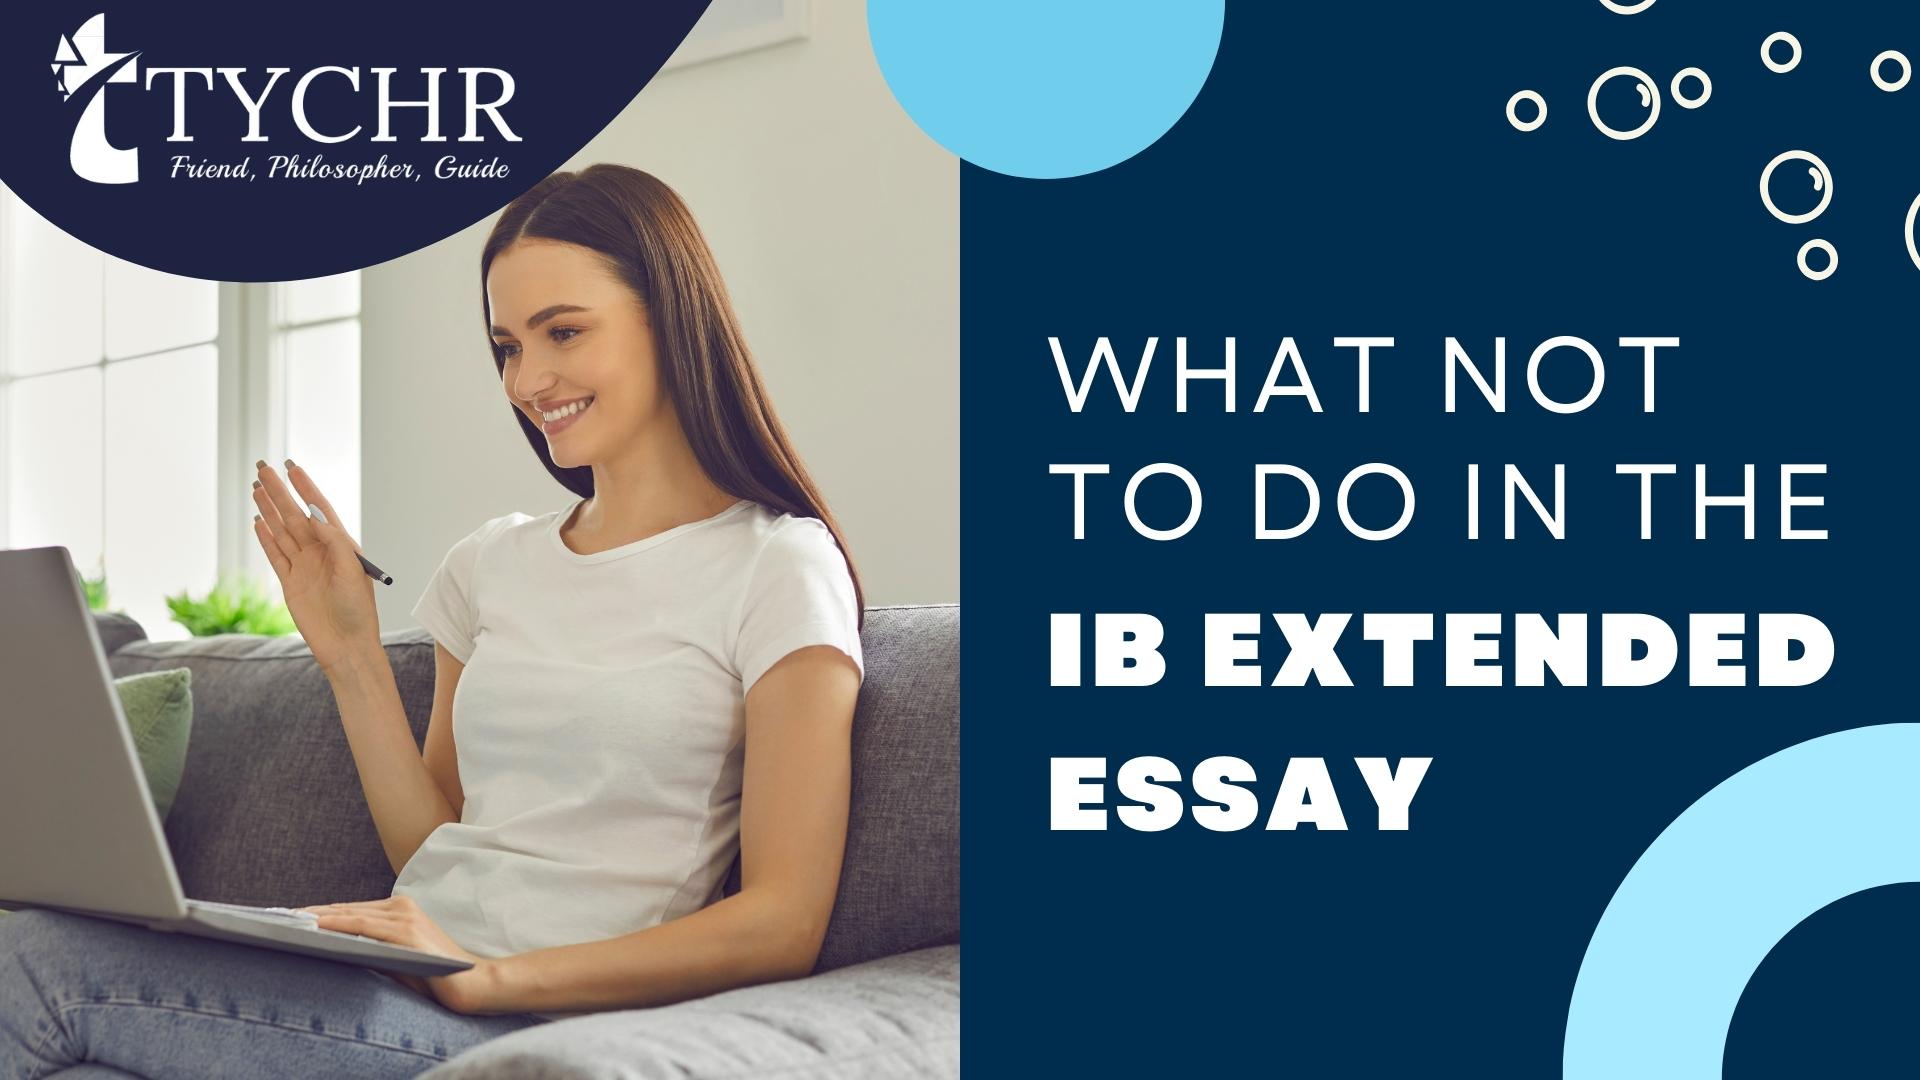 What Not to do in the Extended Essay [IB]